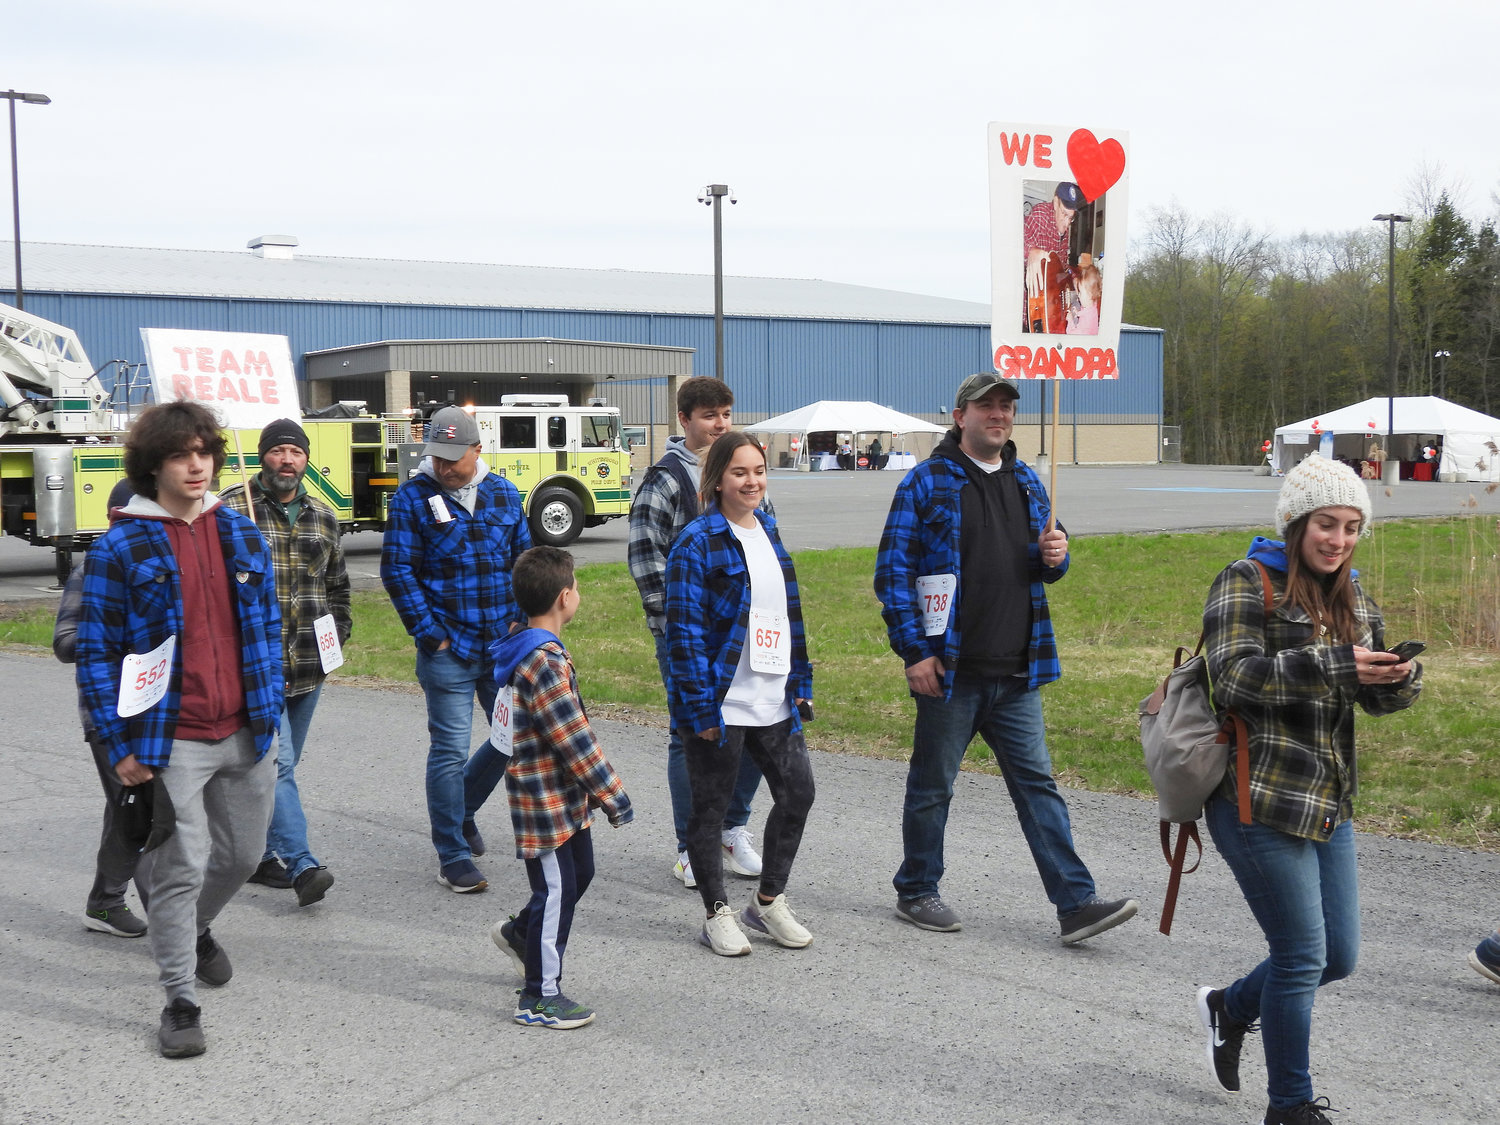 Walkers set out for the America's Greatest Heart Run and Walk on Satuday, May 7 from Accelerate Sports, walking the 3k to raise awareness and support for heart health